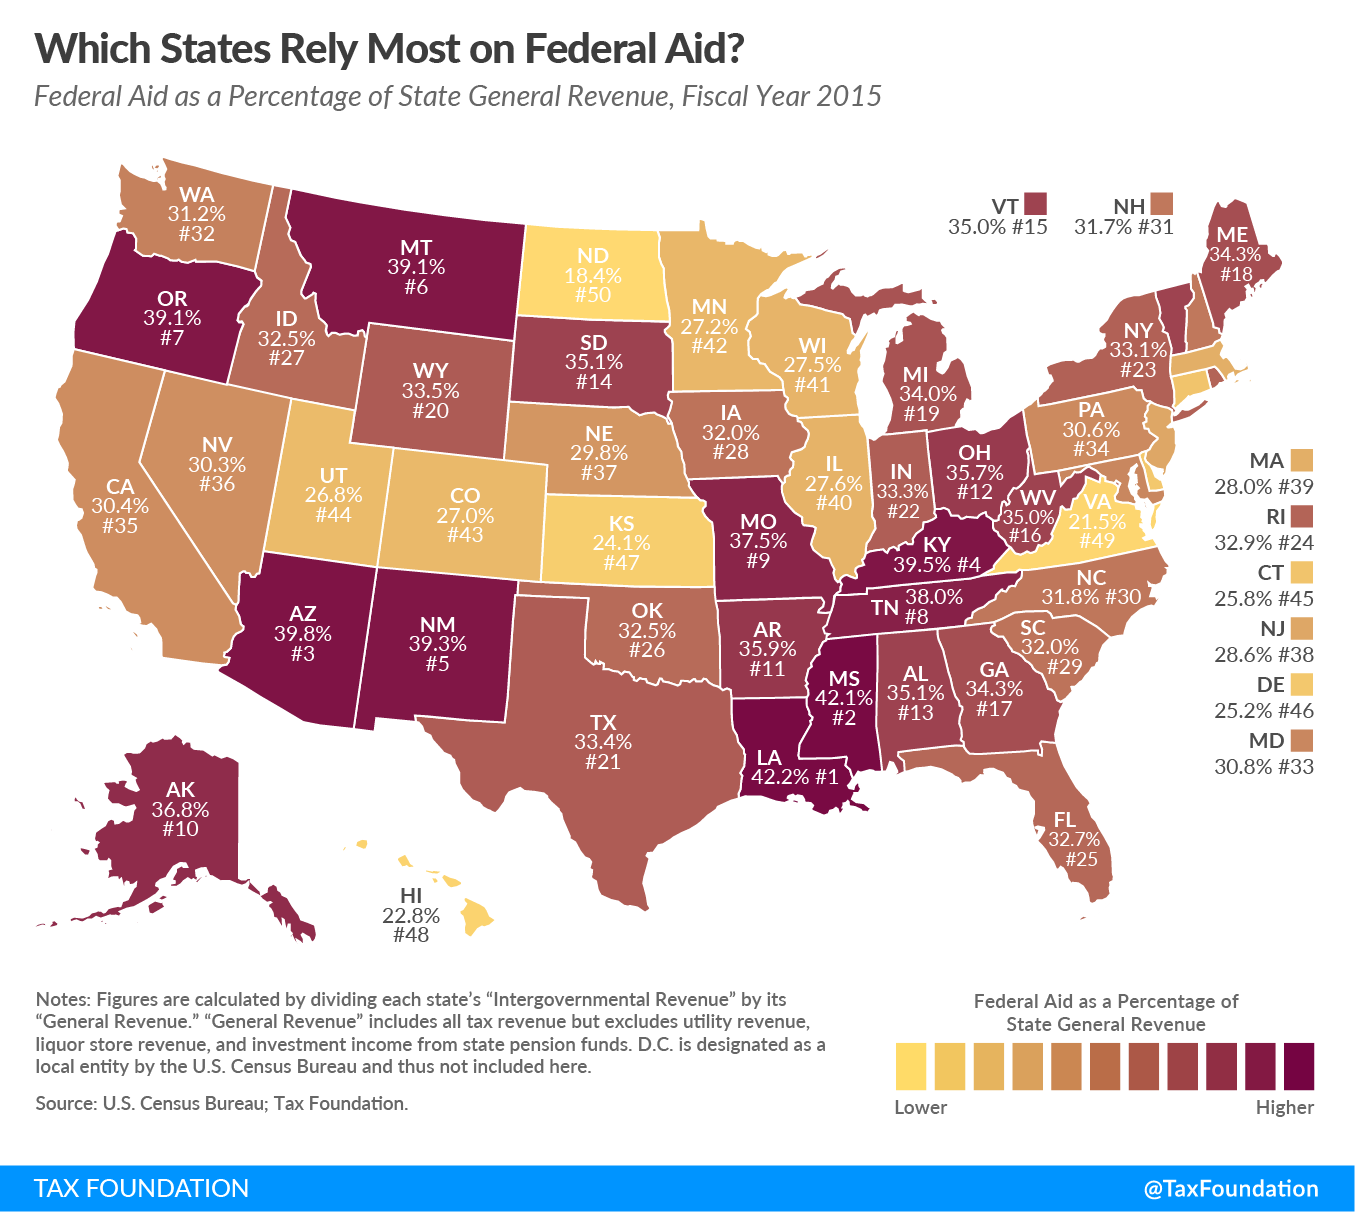 Federal Aid as a Percentage of State General Revenue, Fiscal Year 2015